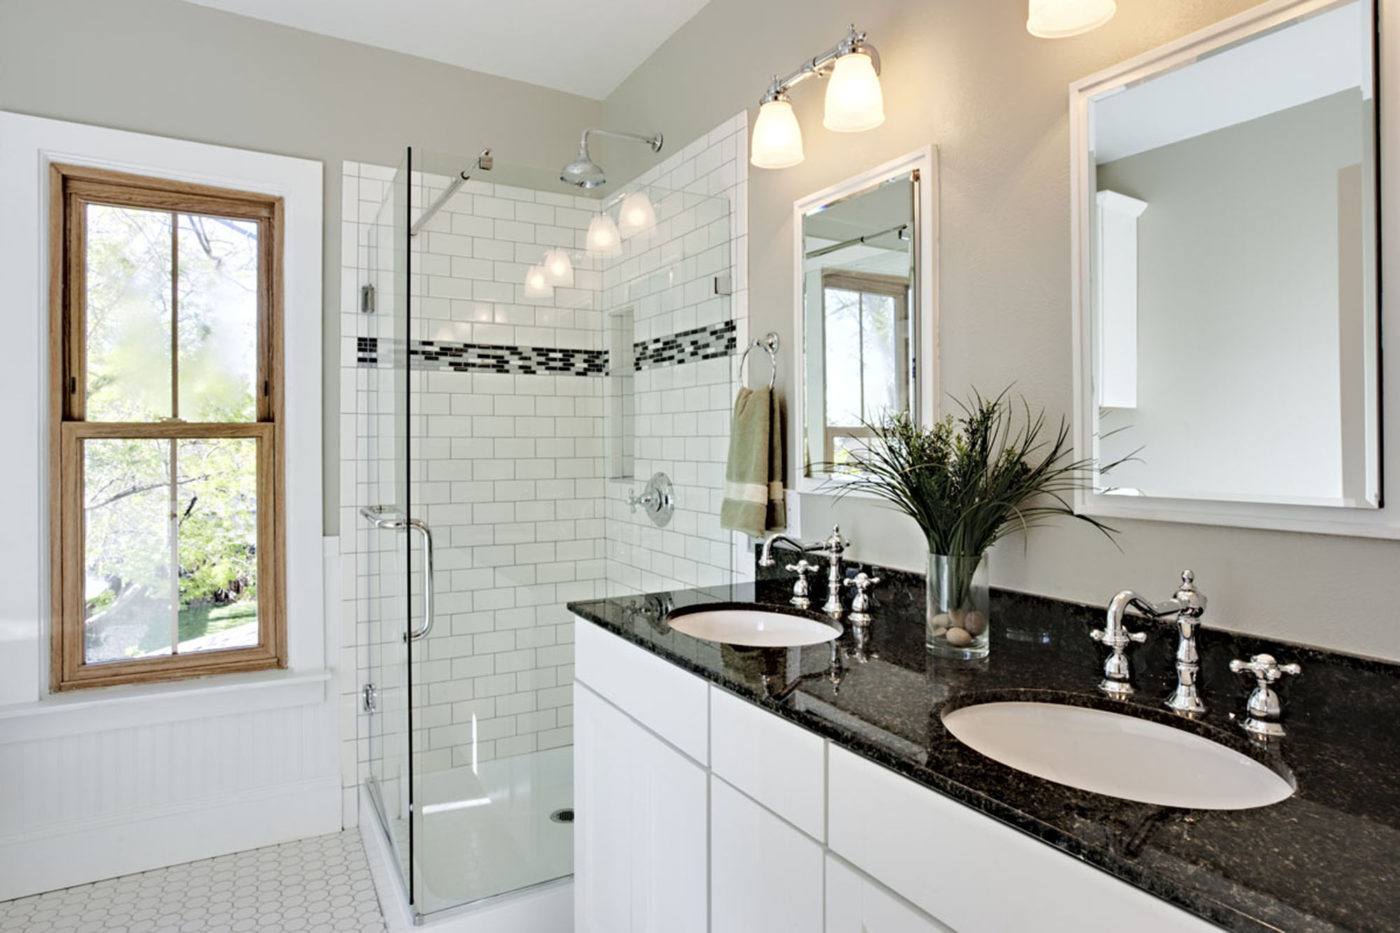 Professional Bathroom Remodeling Services